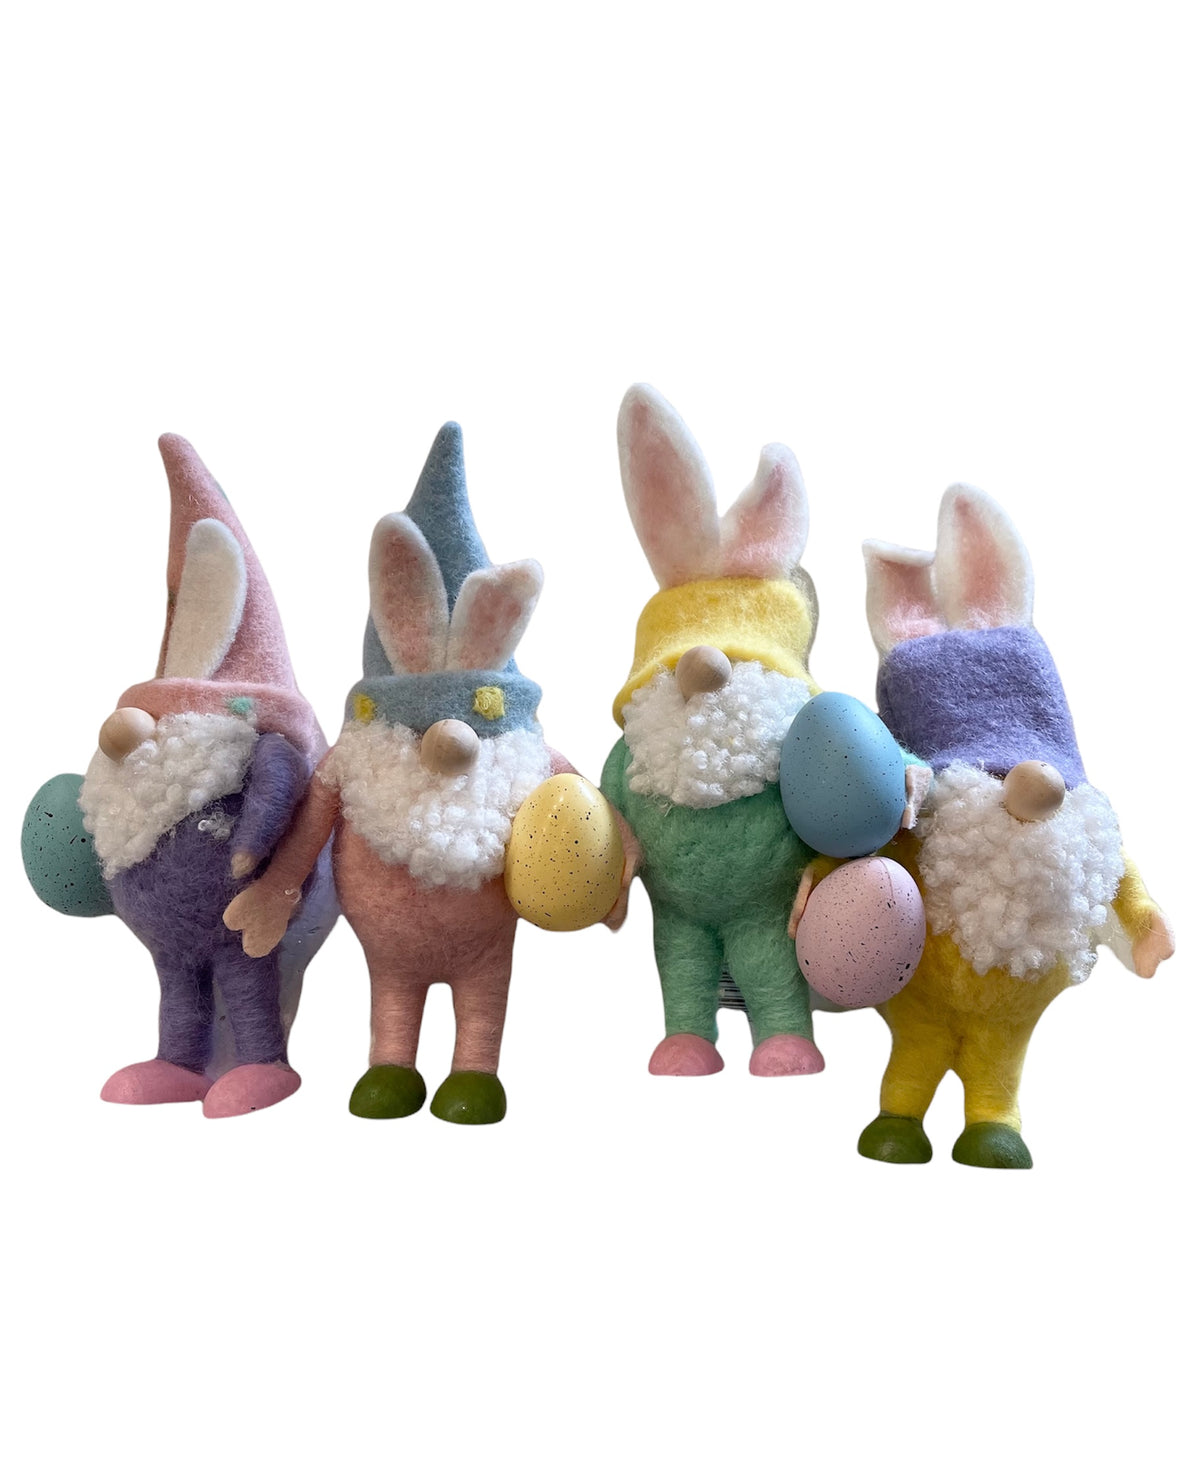 One Hundred 80 Degrees | Easter Pastel Wool Gnome Figure W/ Egg